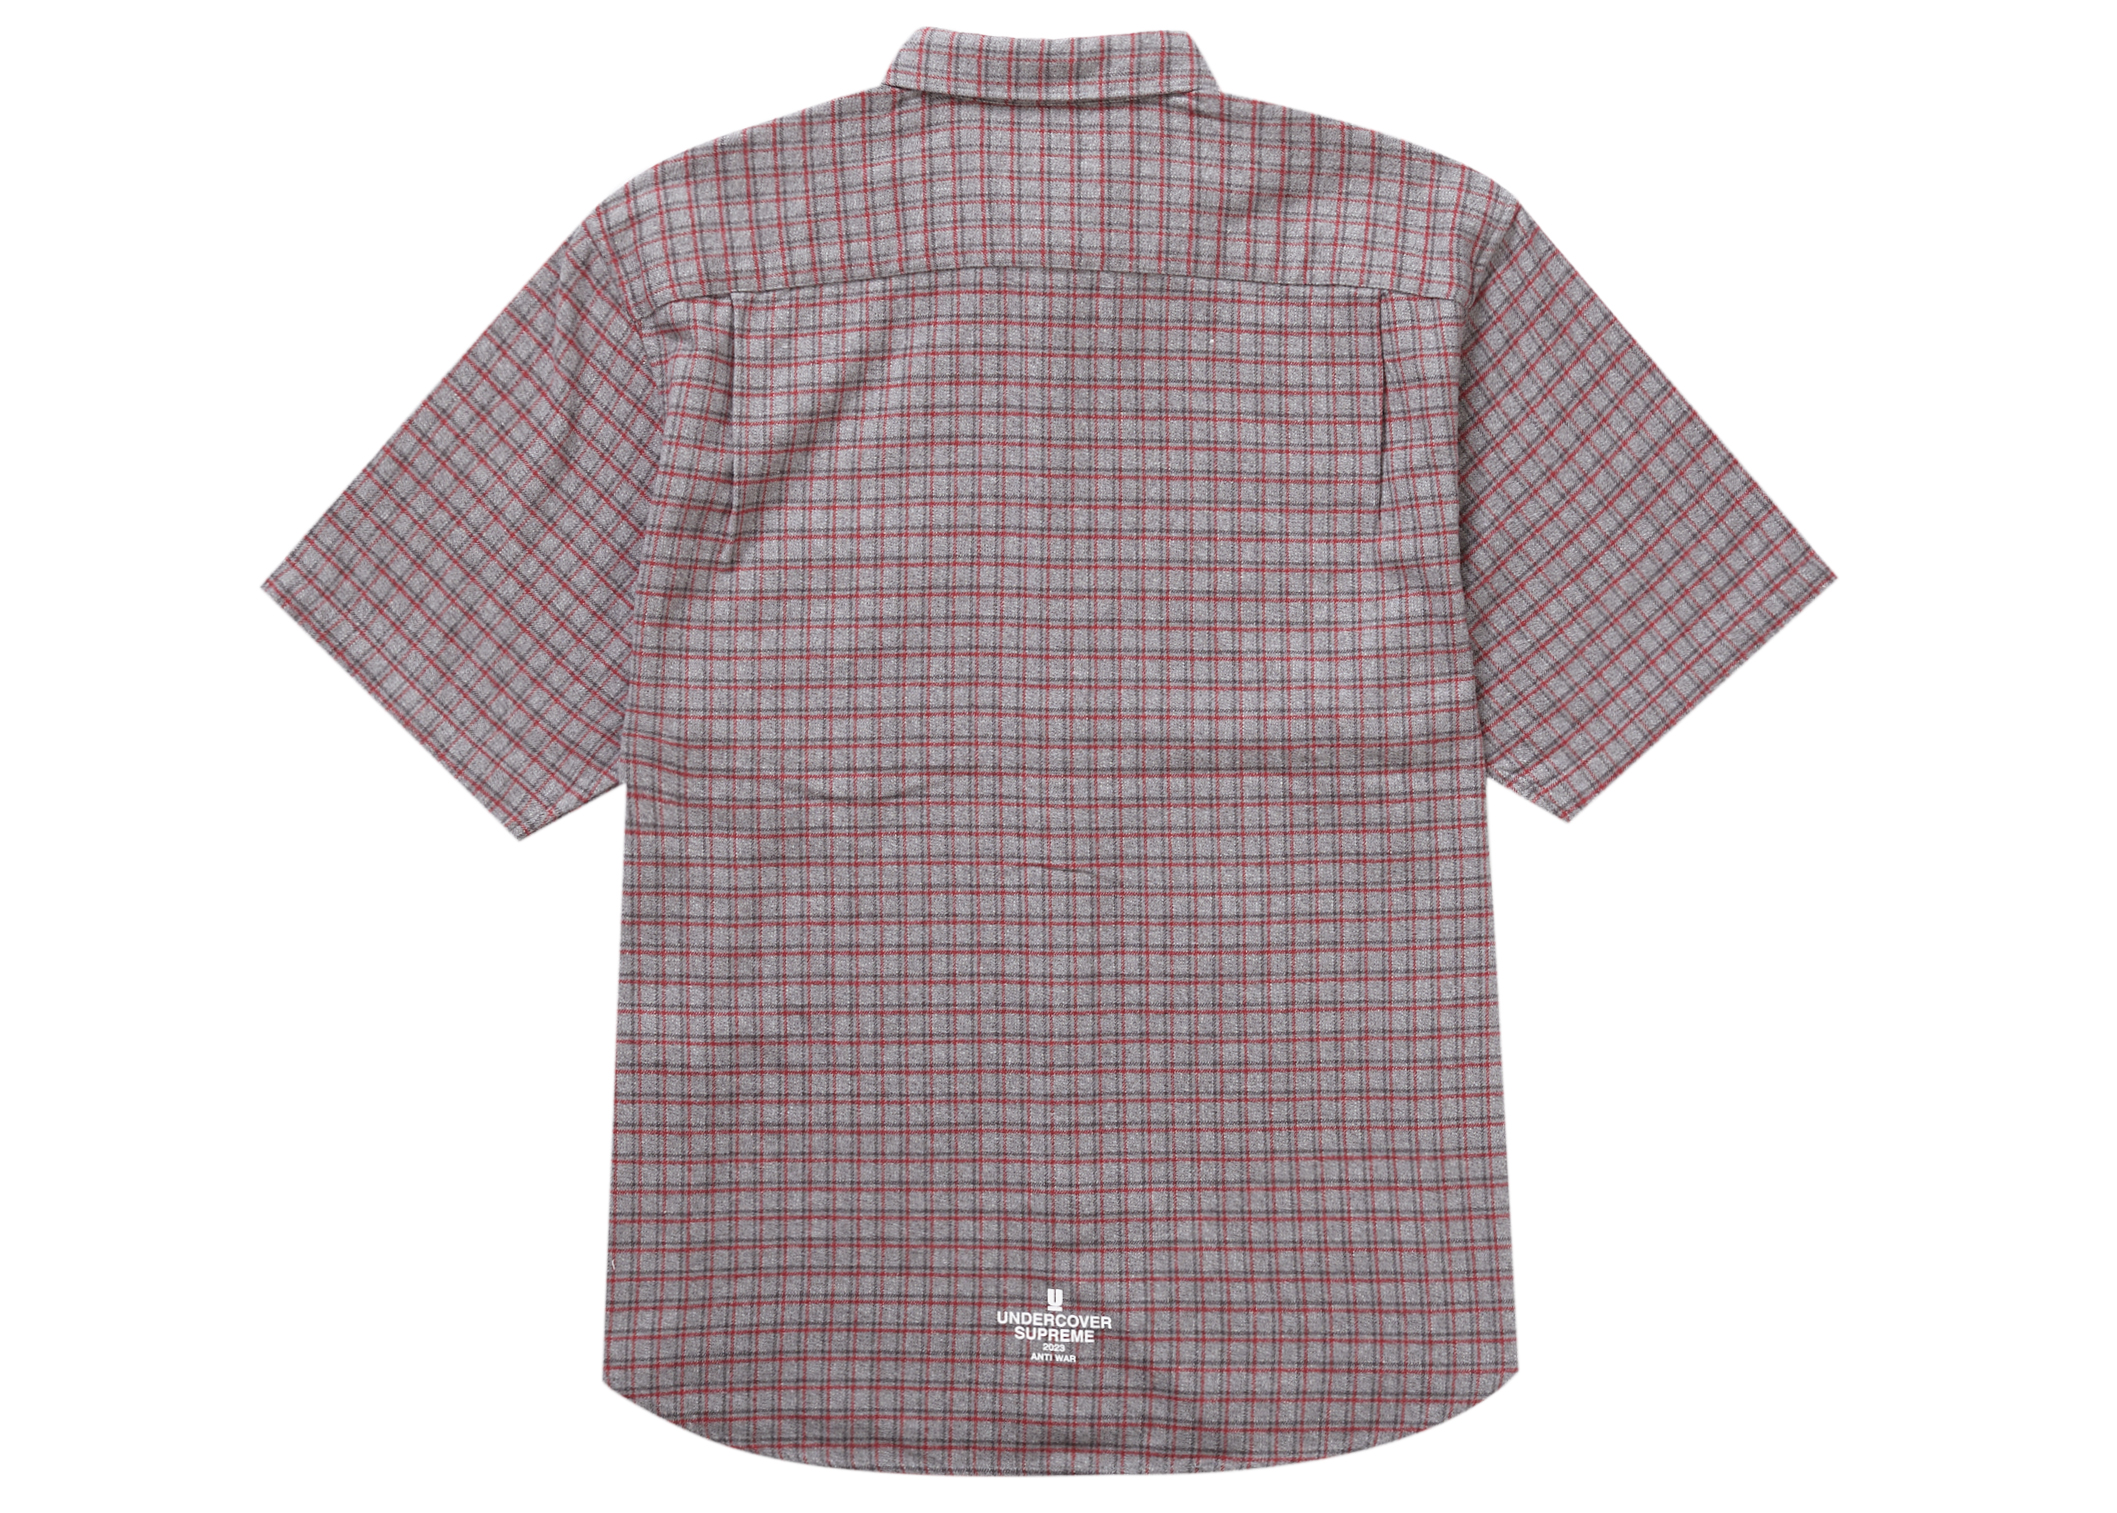 Supreme UNDERCOVER S/S Flannel Shirt Grey Plaid